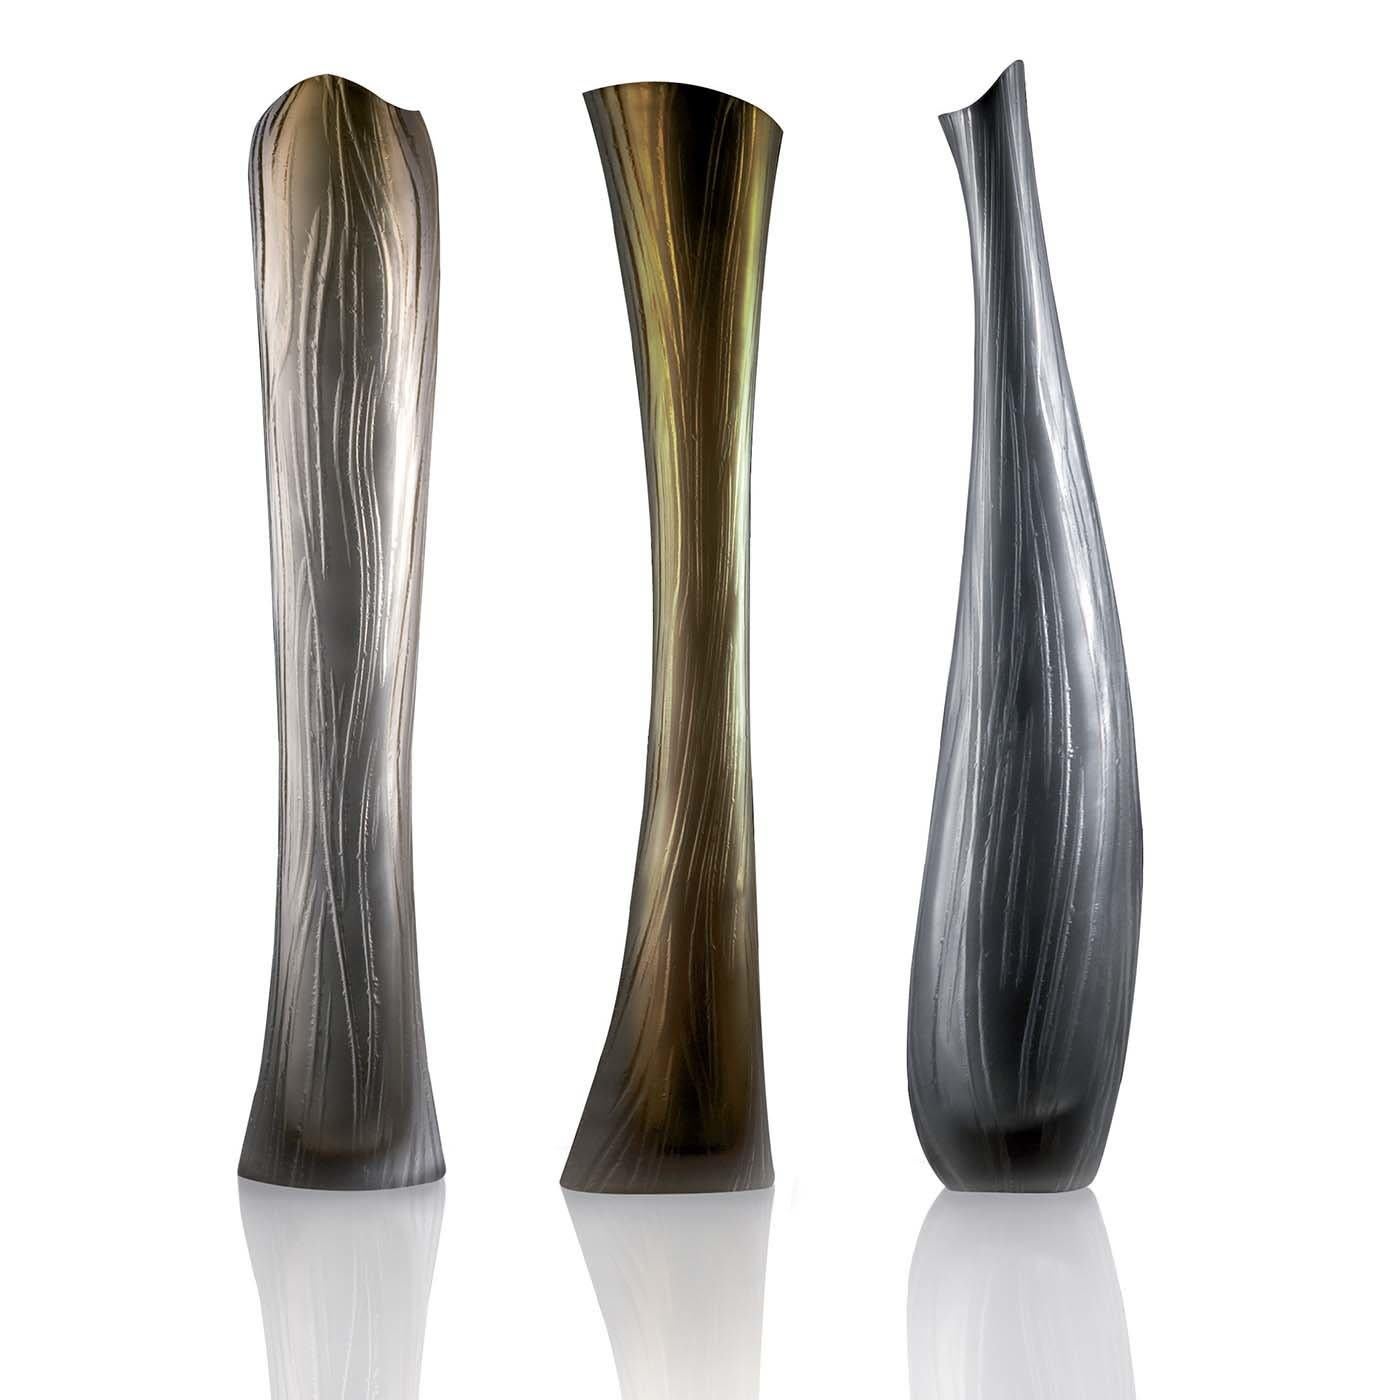 This Murano glass vase from the Sfumati collection is characterized by a series of delicate engraving meticulously crafted by expert artisans on a lathe that create an elegant wavy pattern. The stylized hourglass-inspired shape is featured in a